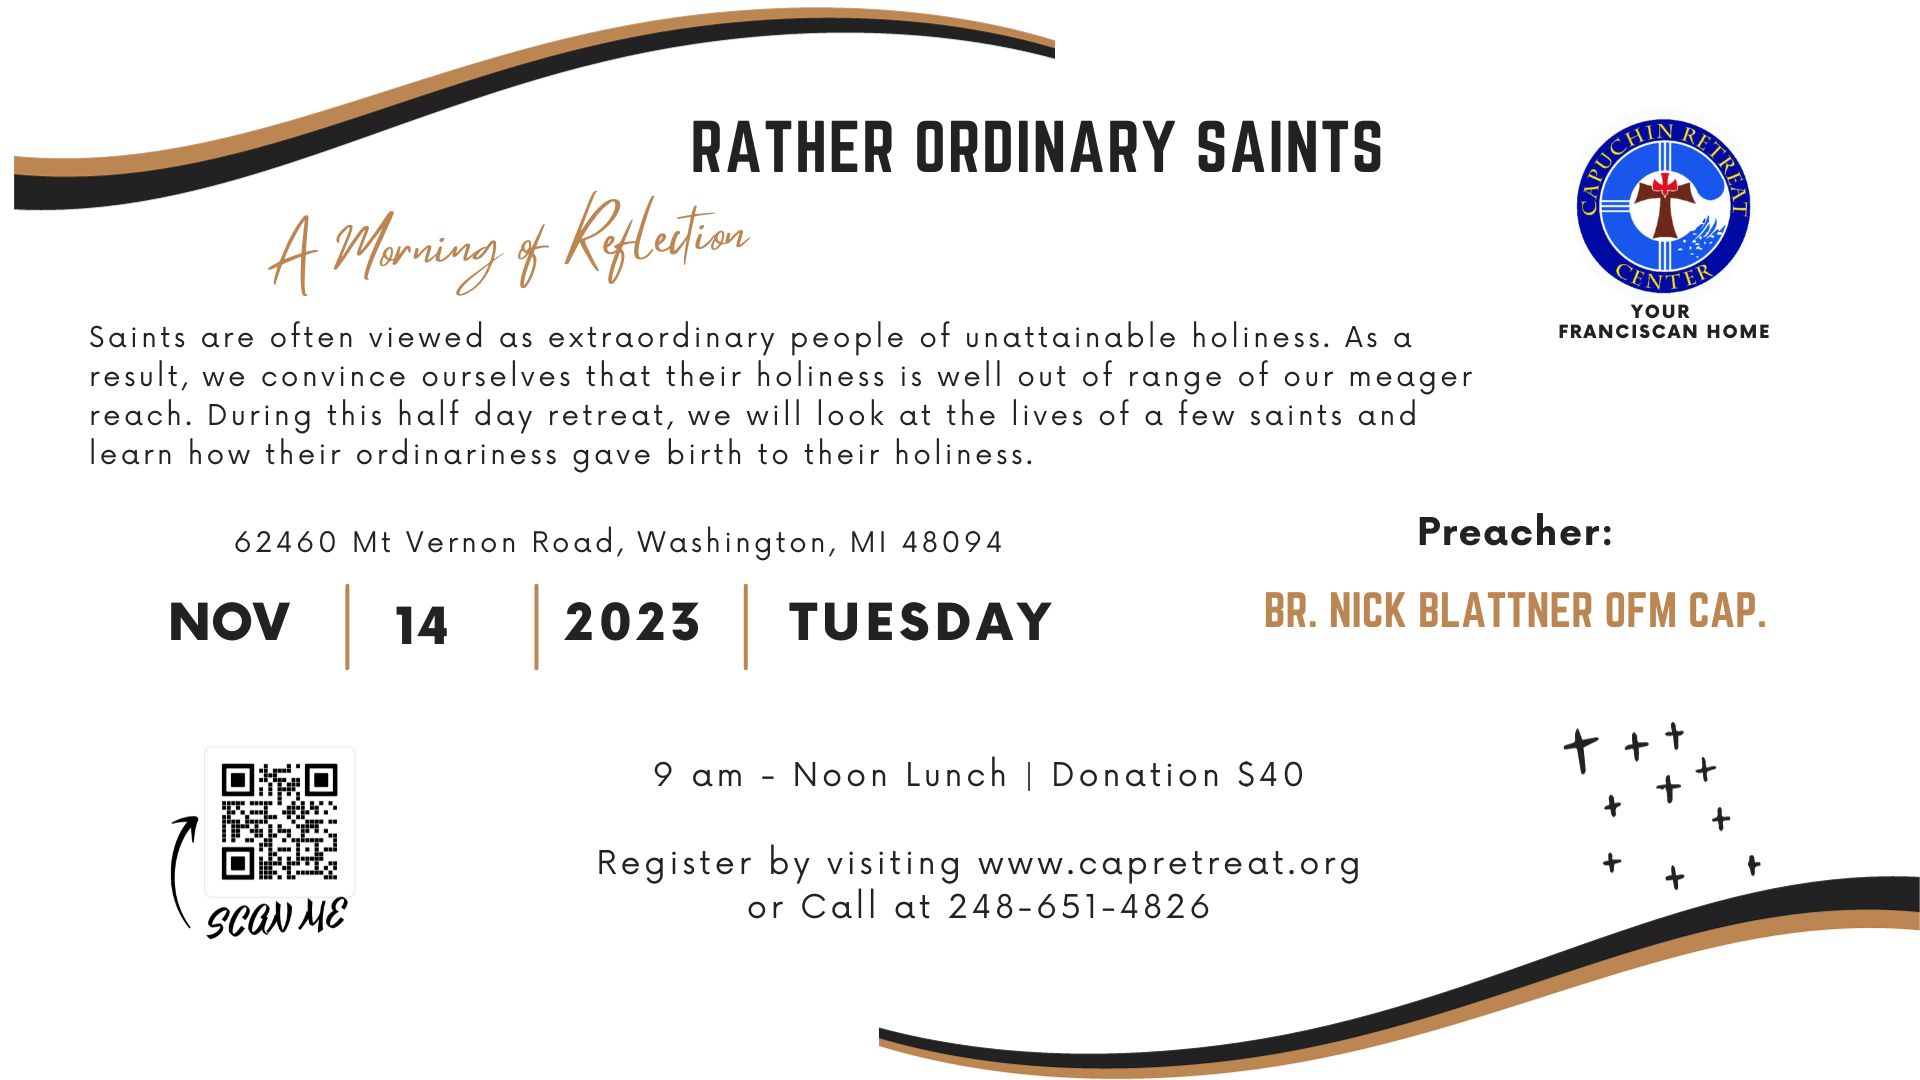 Morning of Reflection: “Rather Ordinary Saints”